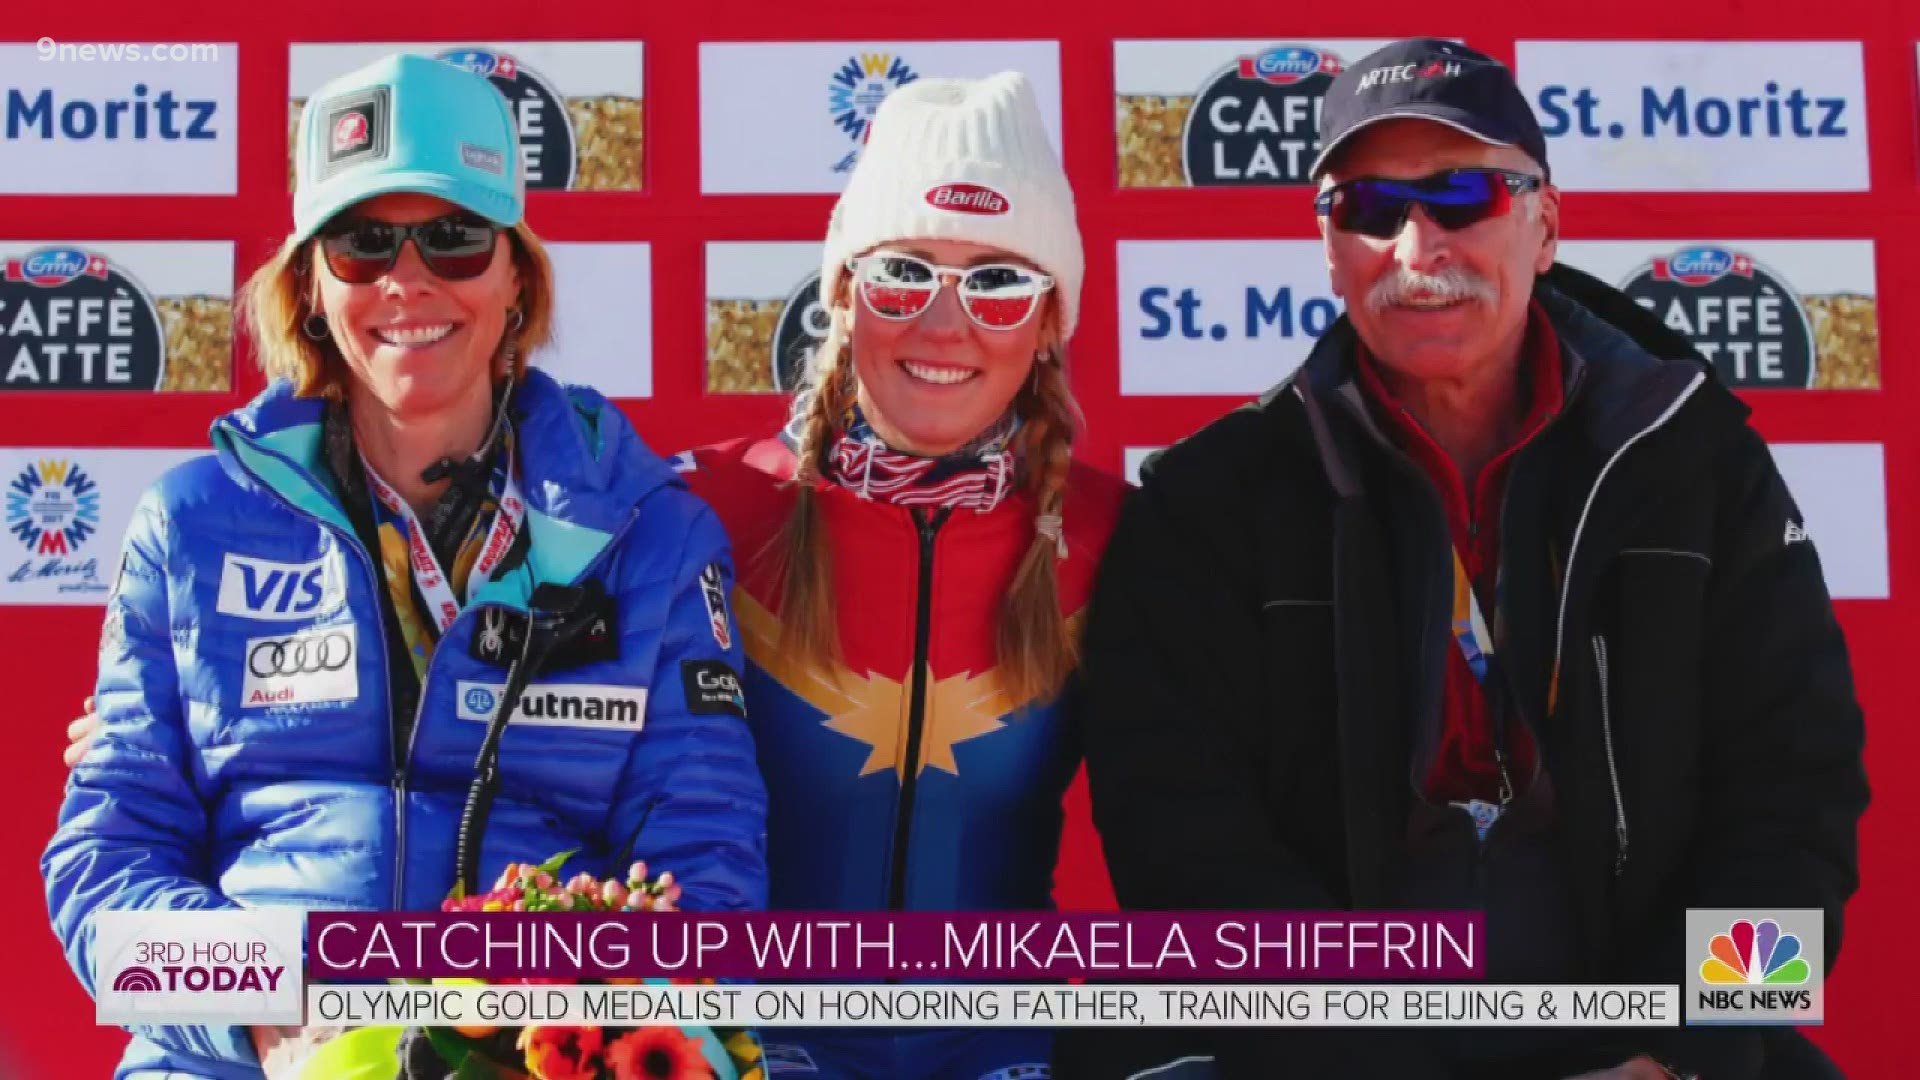 Mikaela Shiffrin talked about her difficult year of losing her father and raising money for athletes who are struggling through the pandemic.